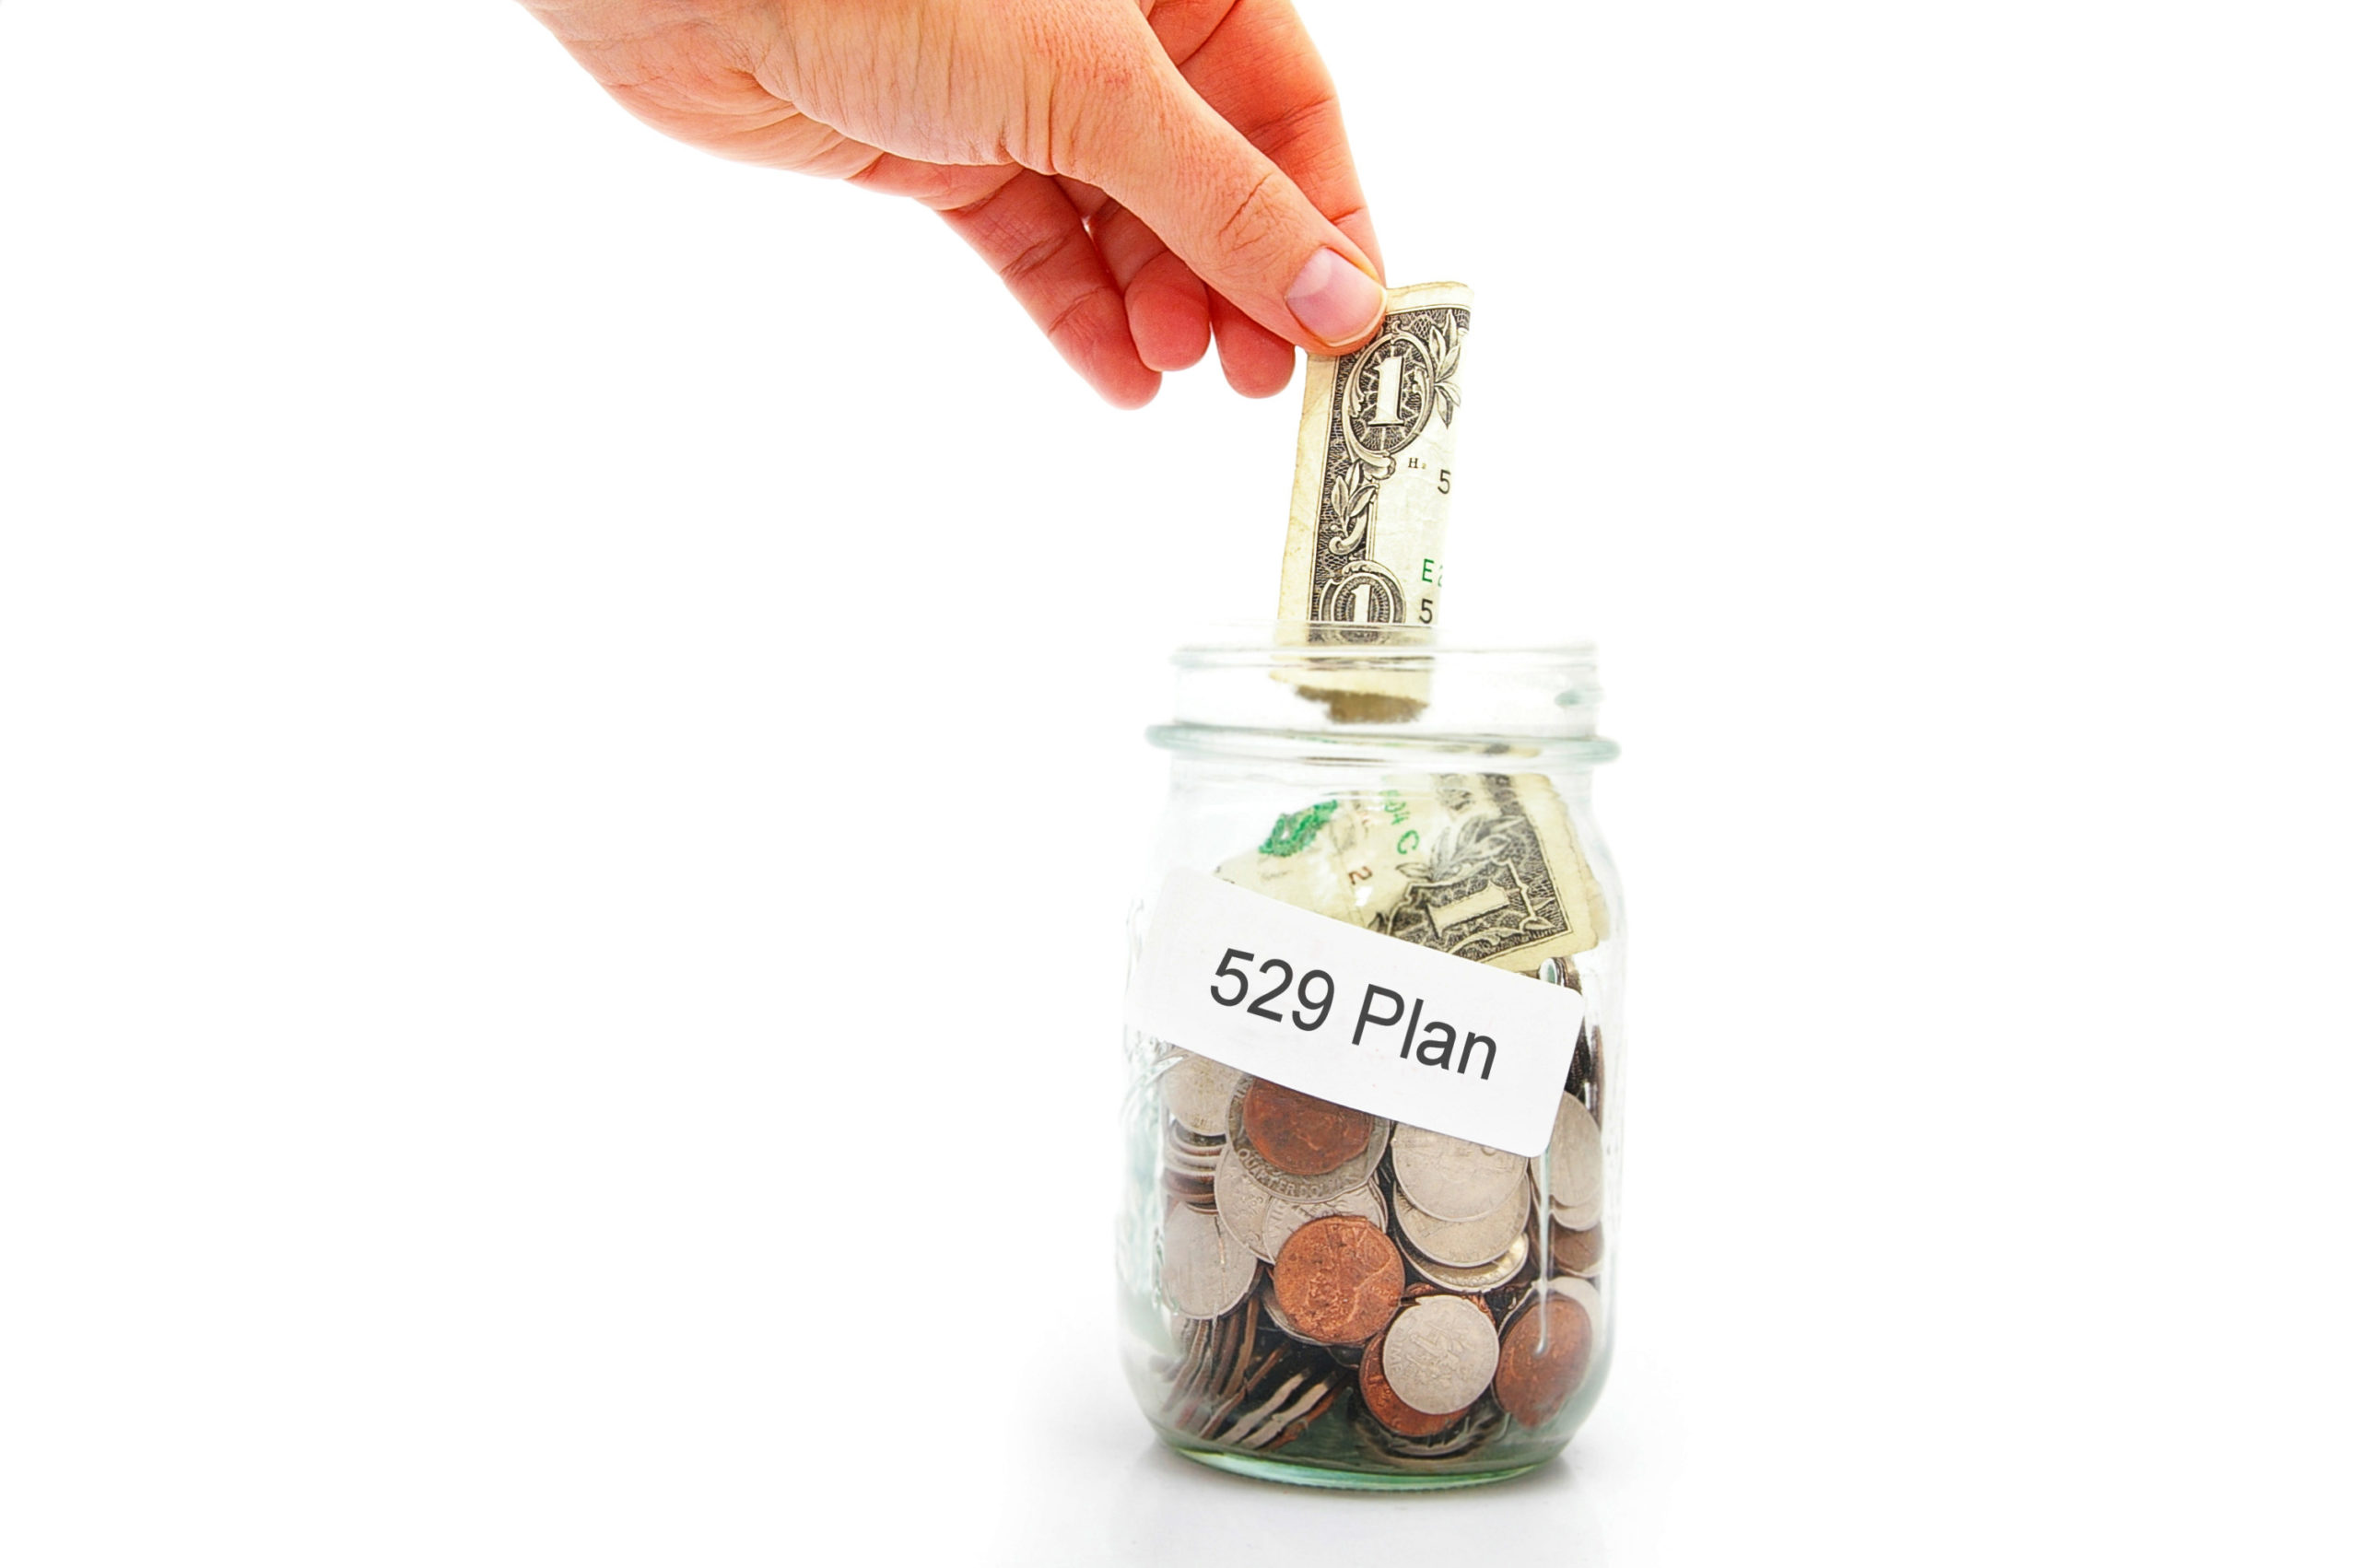 529 Plans: A Bad Name for a Great Way to Save for College … and More